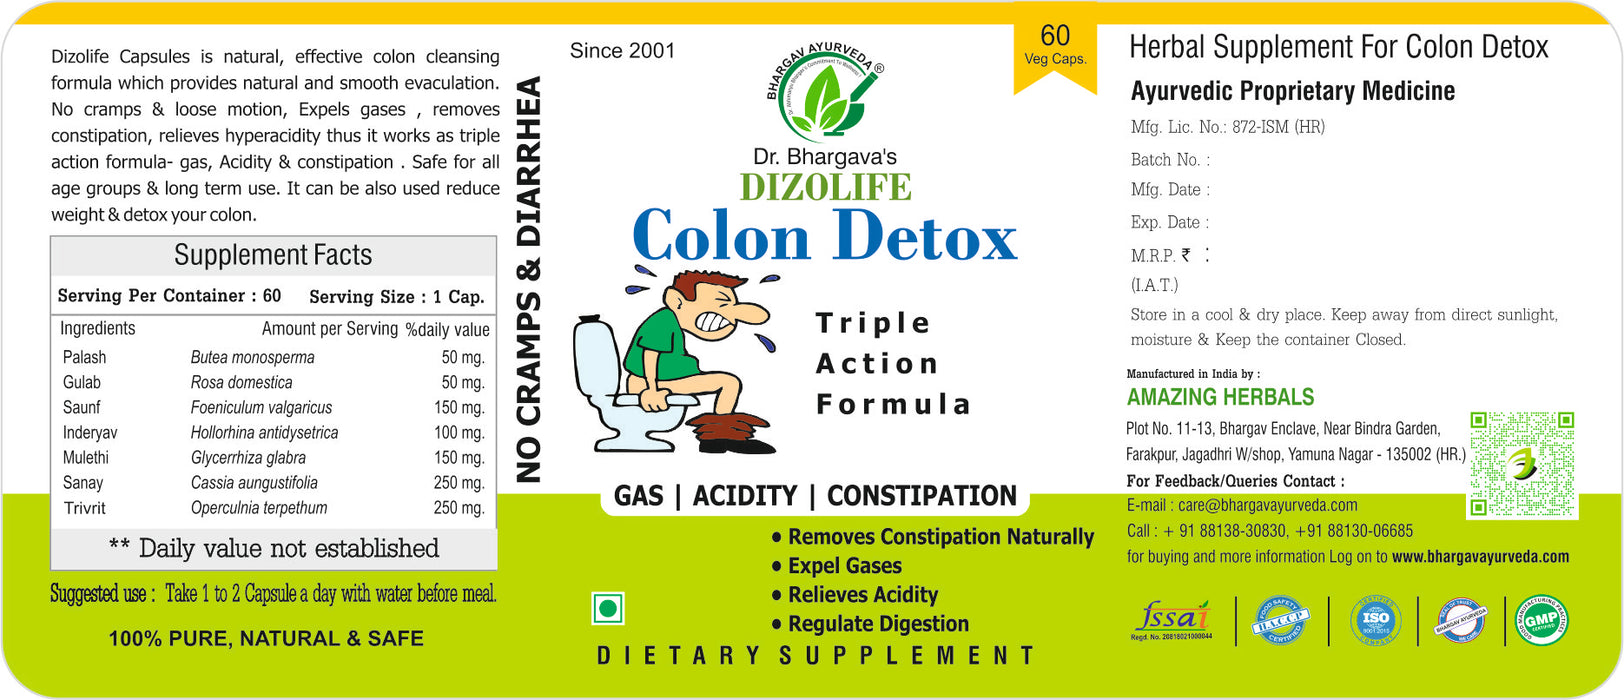 Dr. Bhargav’s – Colon Detox |Best Smooth laxative Capsule | Relieves constipation NAturally | Smooth Evacuation with No Cramps No Diarrhea |Triple action formula -Acidity, Gas , Constipation | Expels Gases NAturally | Reduces girth of abdomen& Lumbar| wei